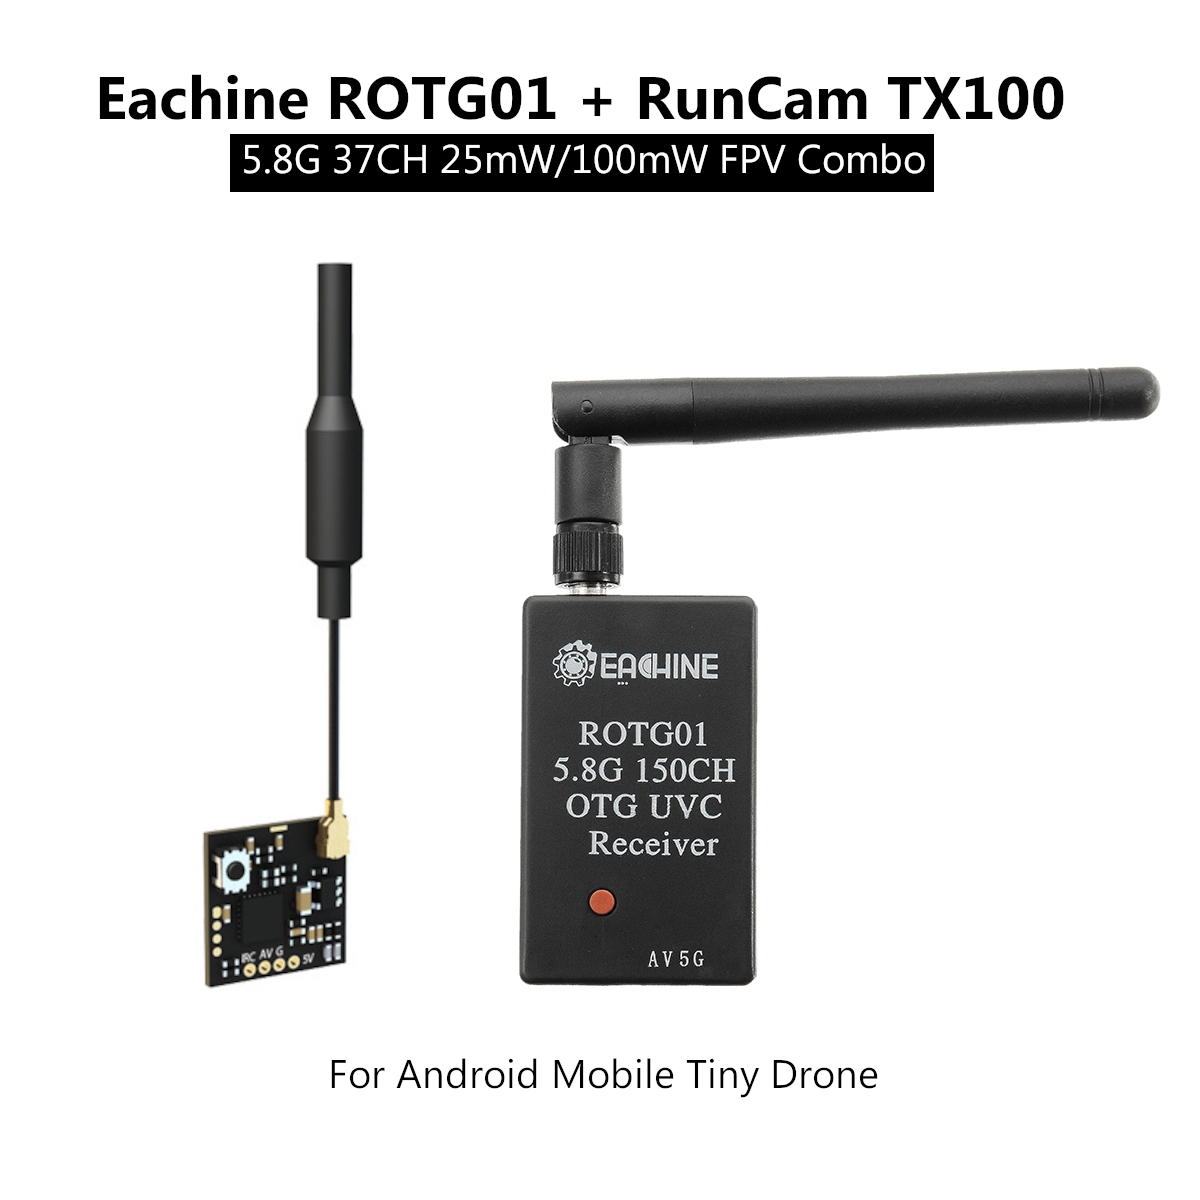 Eachine ROTG01 + RunCam TX100 5.8G 37CH 25mW/100mW FPV Combo Transmitter Receiver Black For Android Mobile Tiny Drone